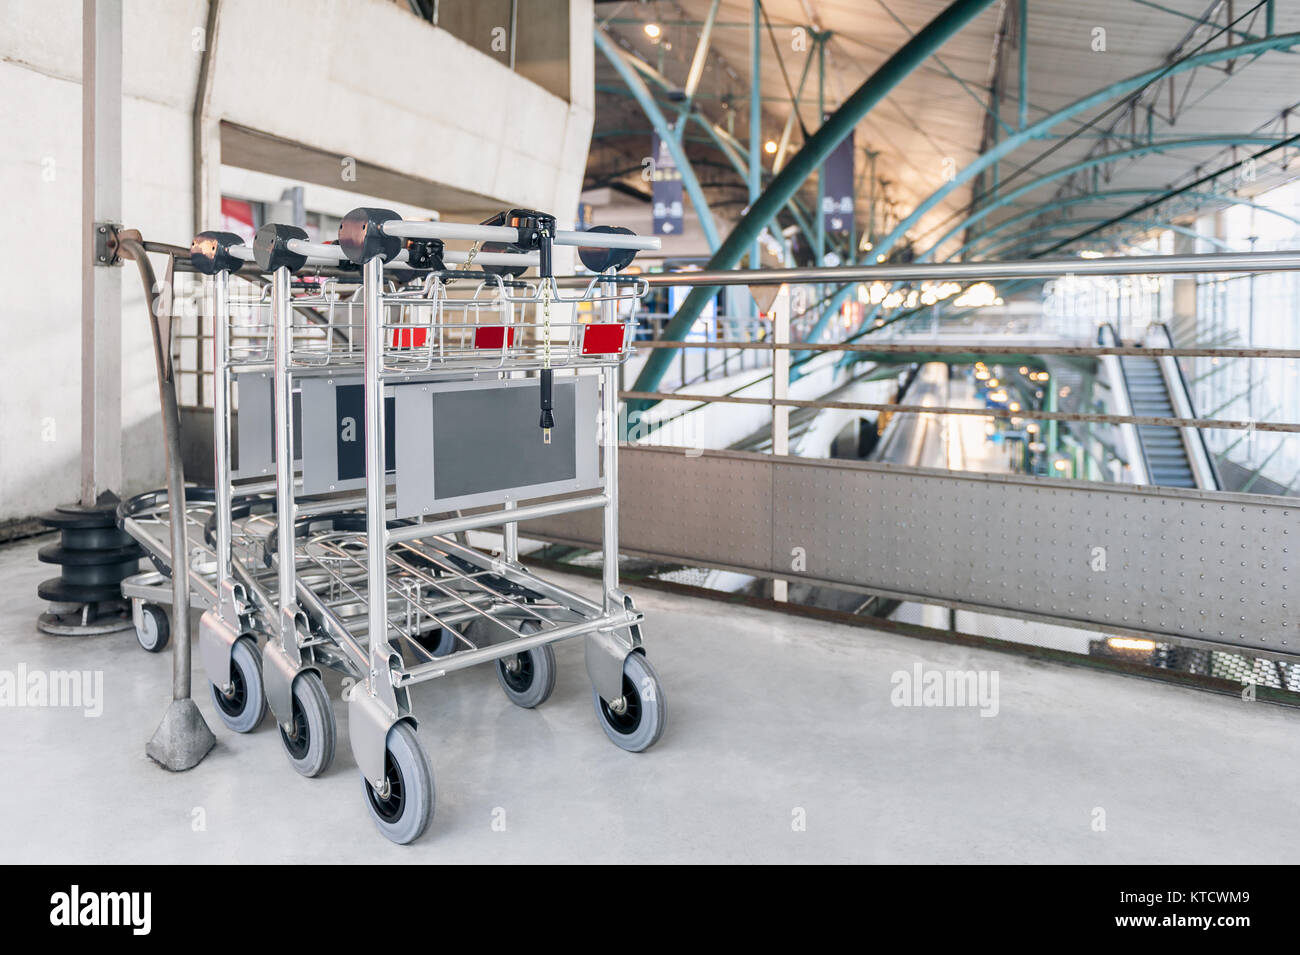 Luggage Carts at Lille Europe Railway Station, Lille, Northern France Stock Photo